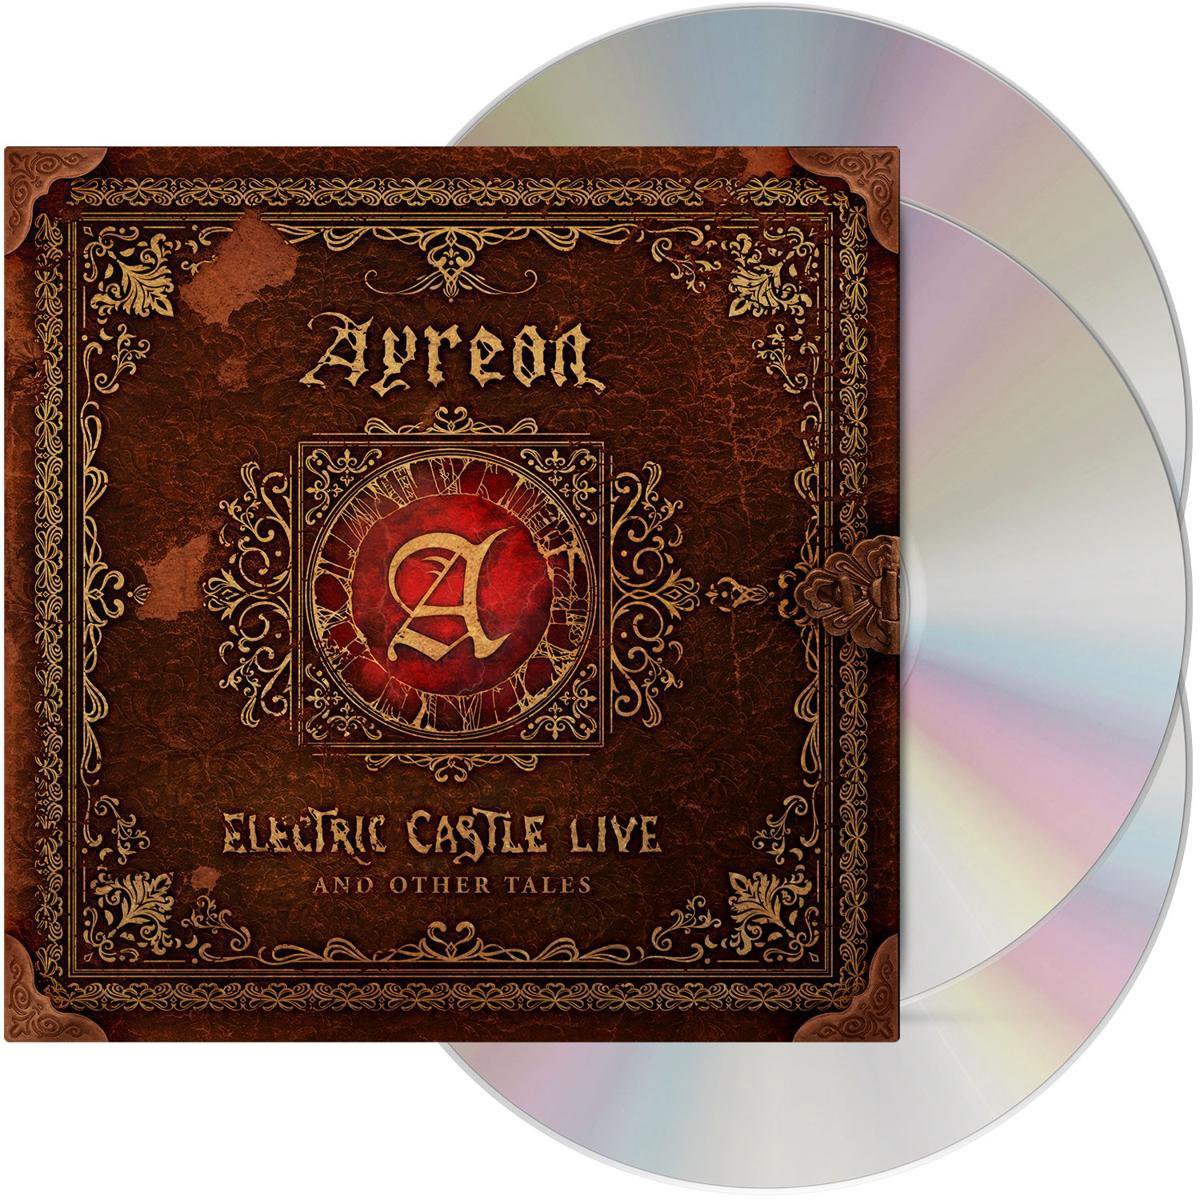 Electric Castle Live And Other Tales - Ayreon